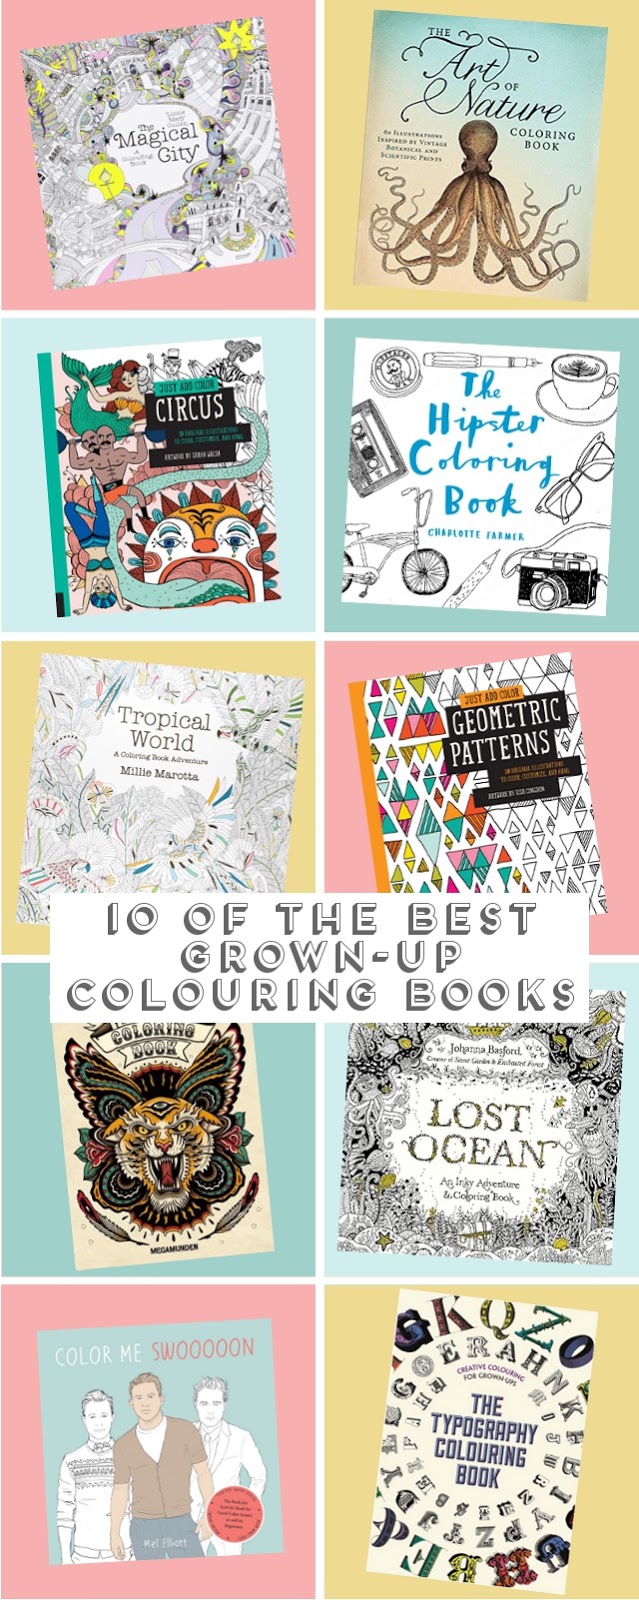 10 Of The Best Grown-Up Colouring Books